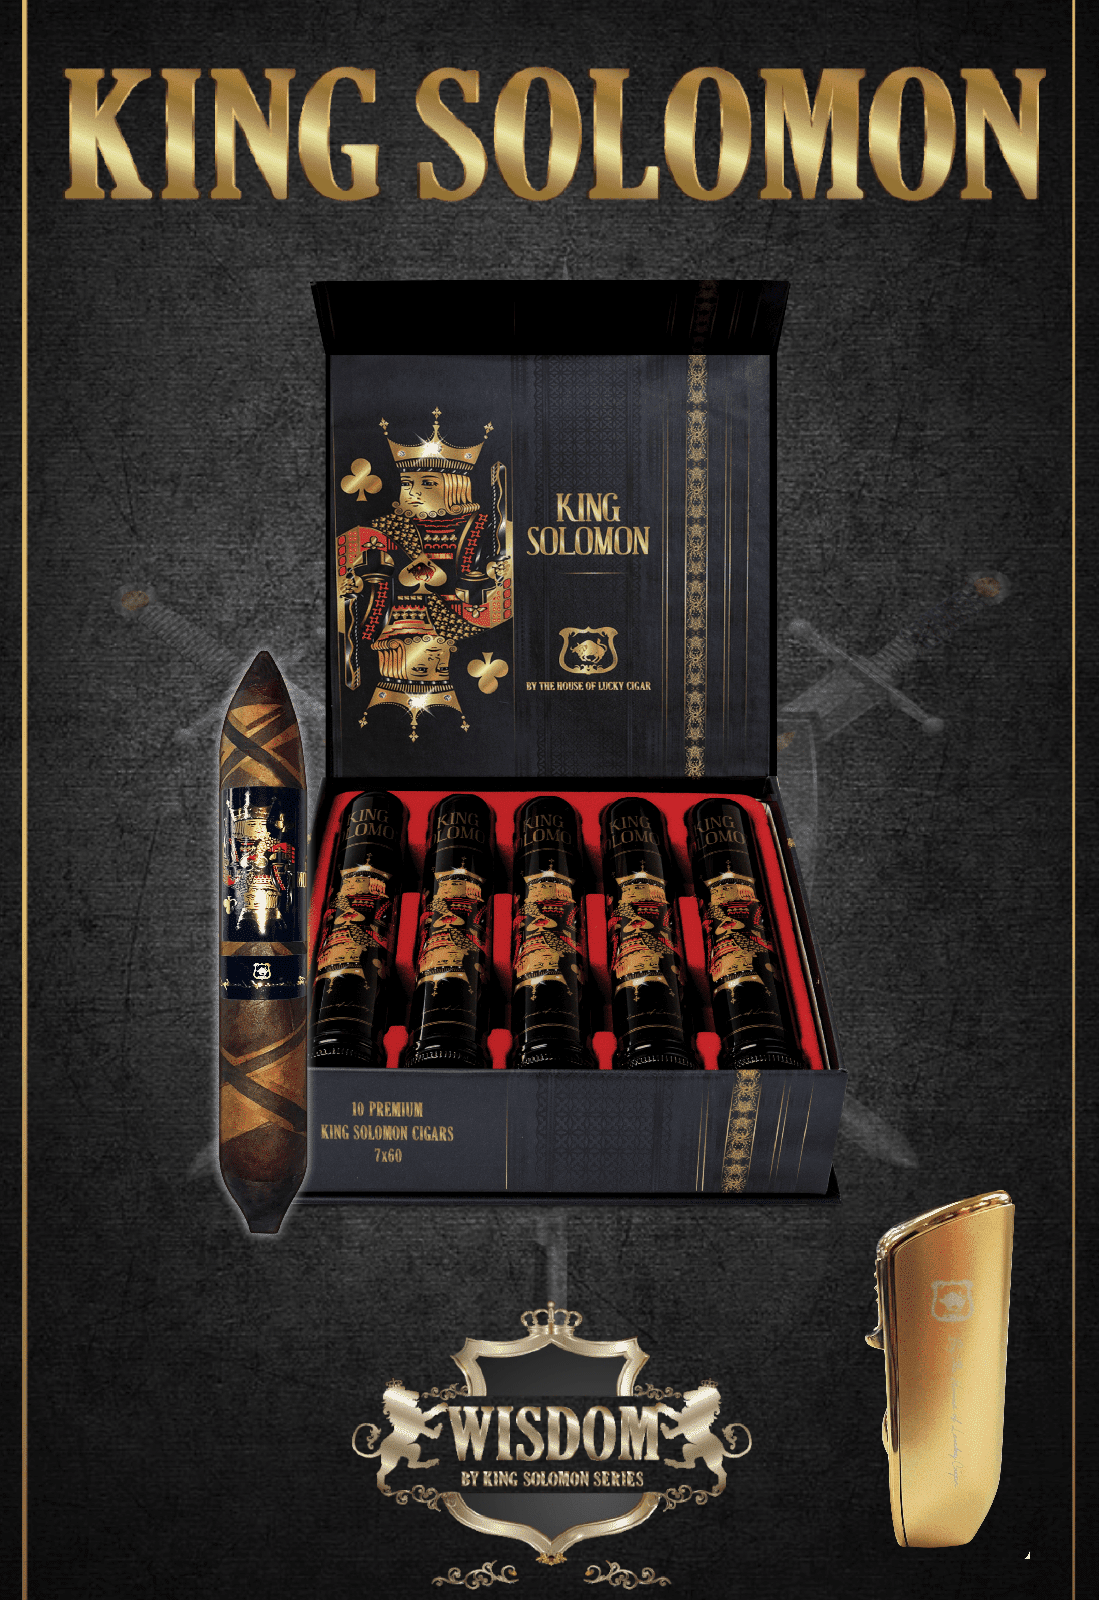 From The King Solomon Series: Box of 10 Solomon 7x60 Cigars with Gun Torch Set